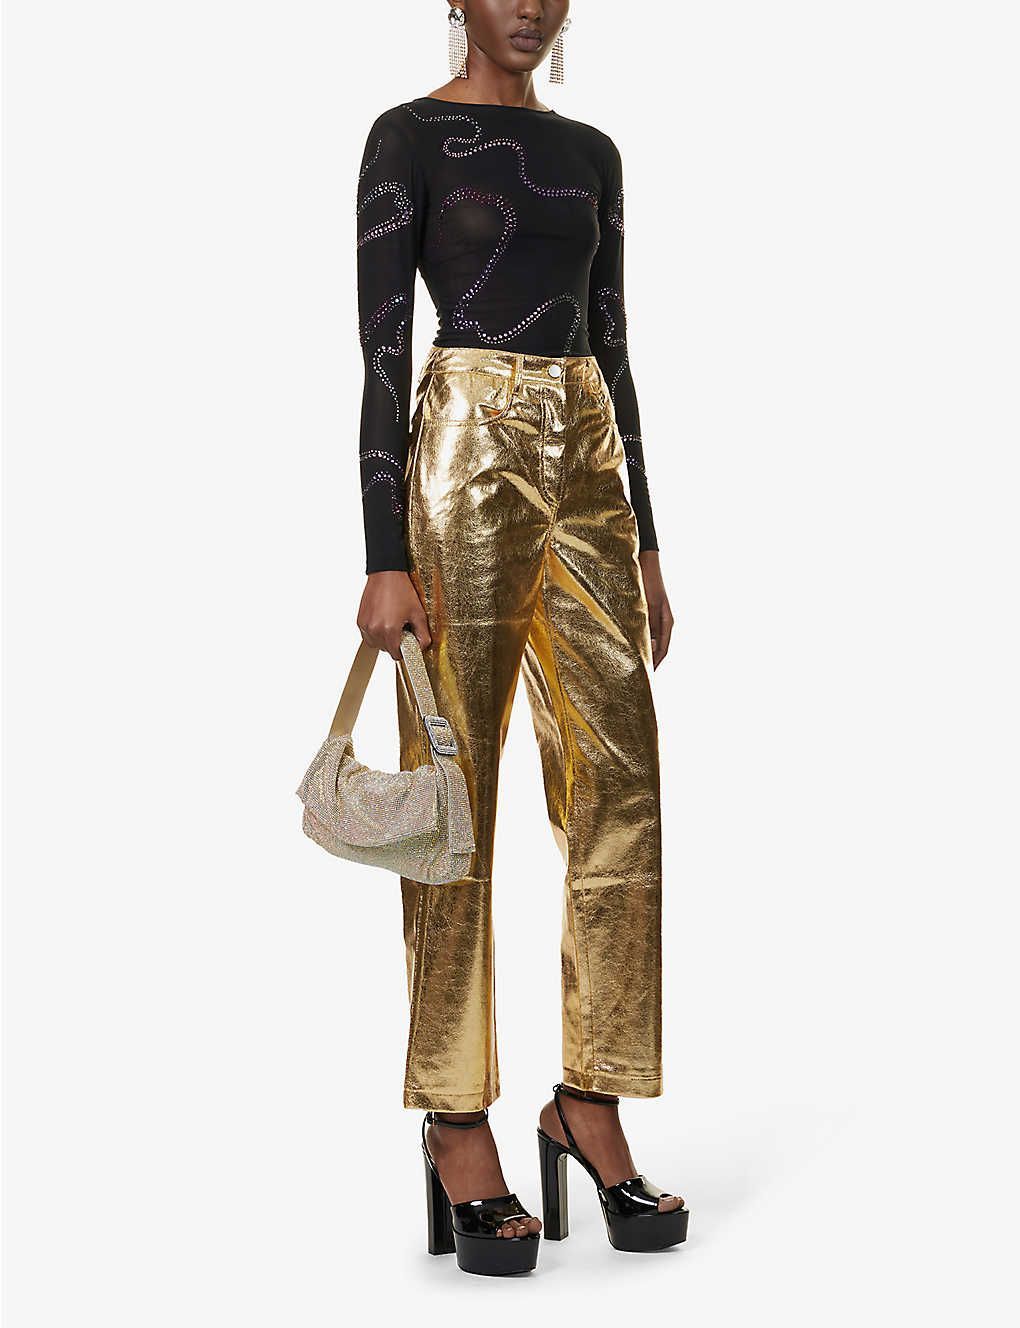 19 Chic Leather Pants Outfit Ideas That Prove You Need A Pair